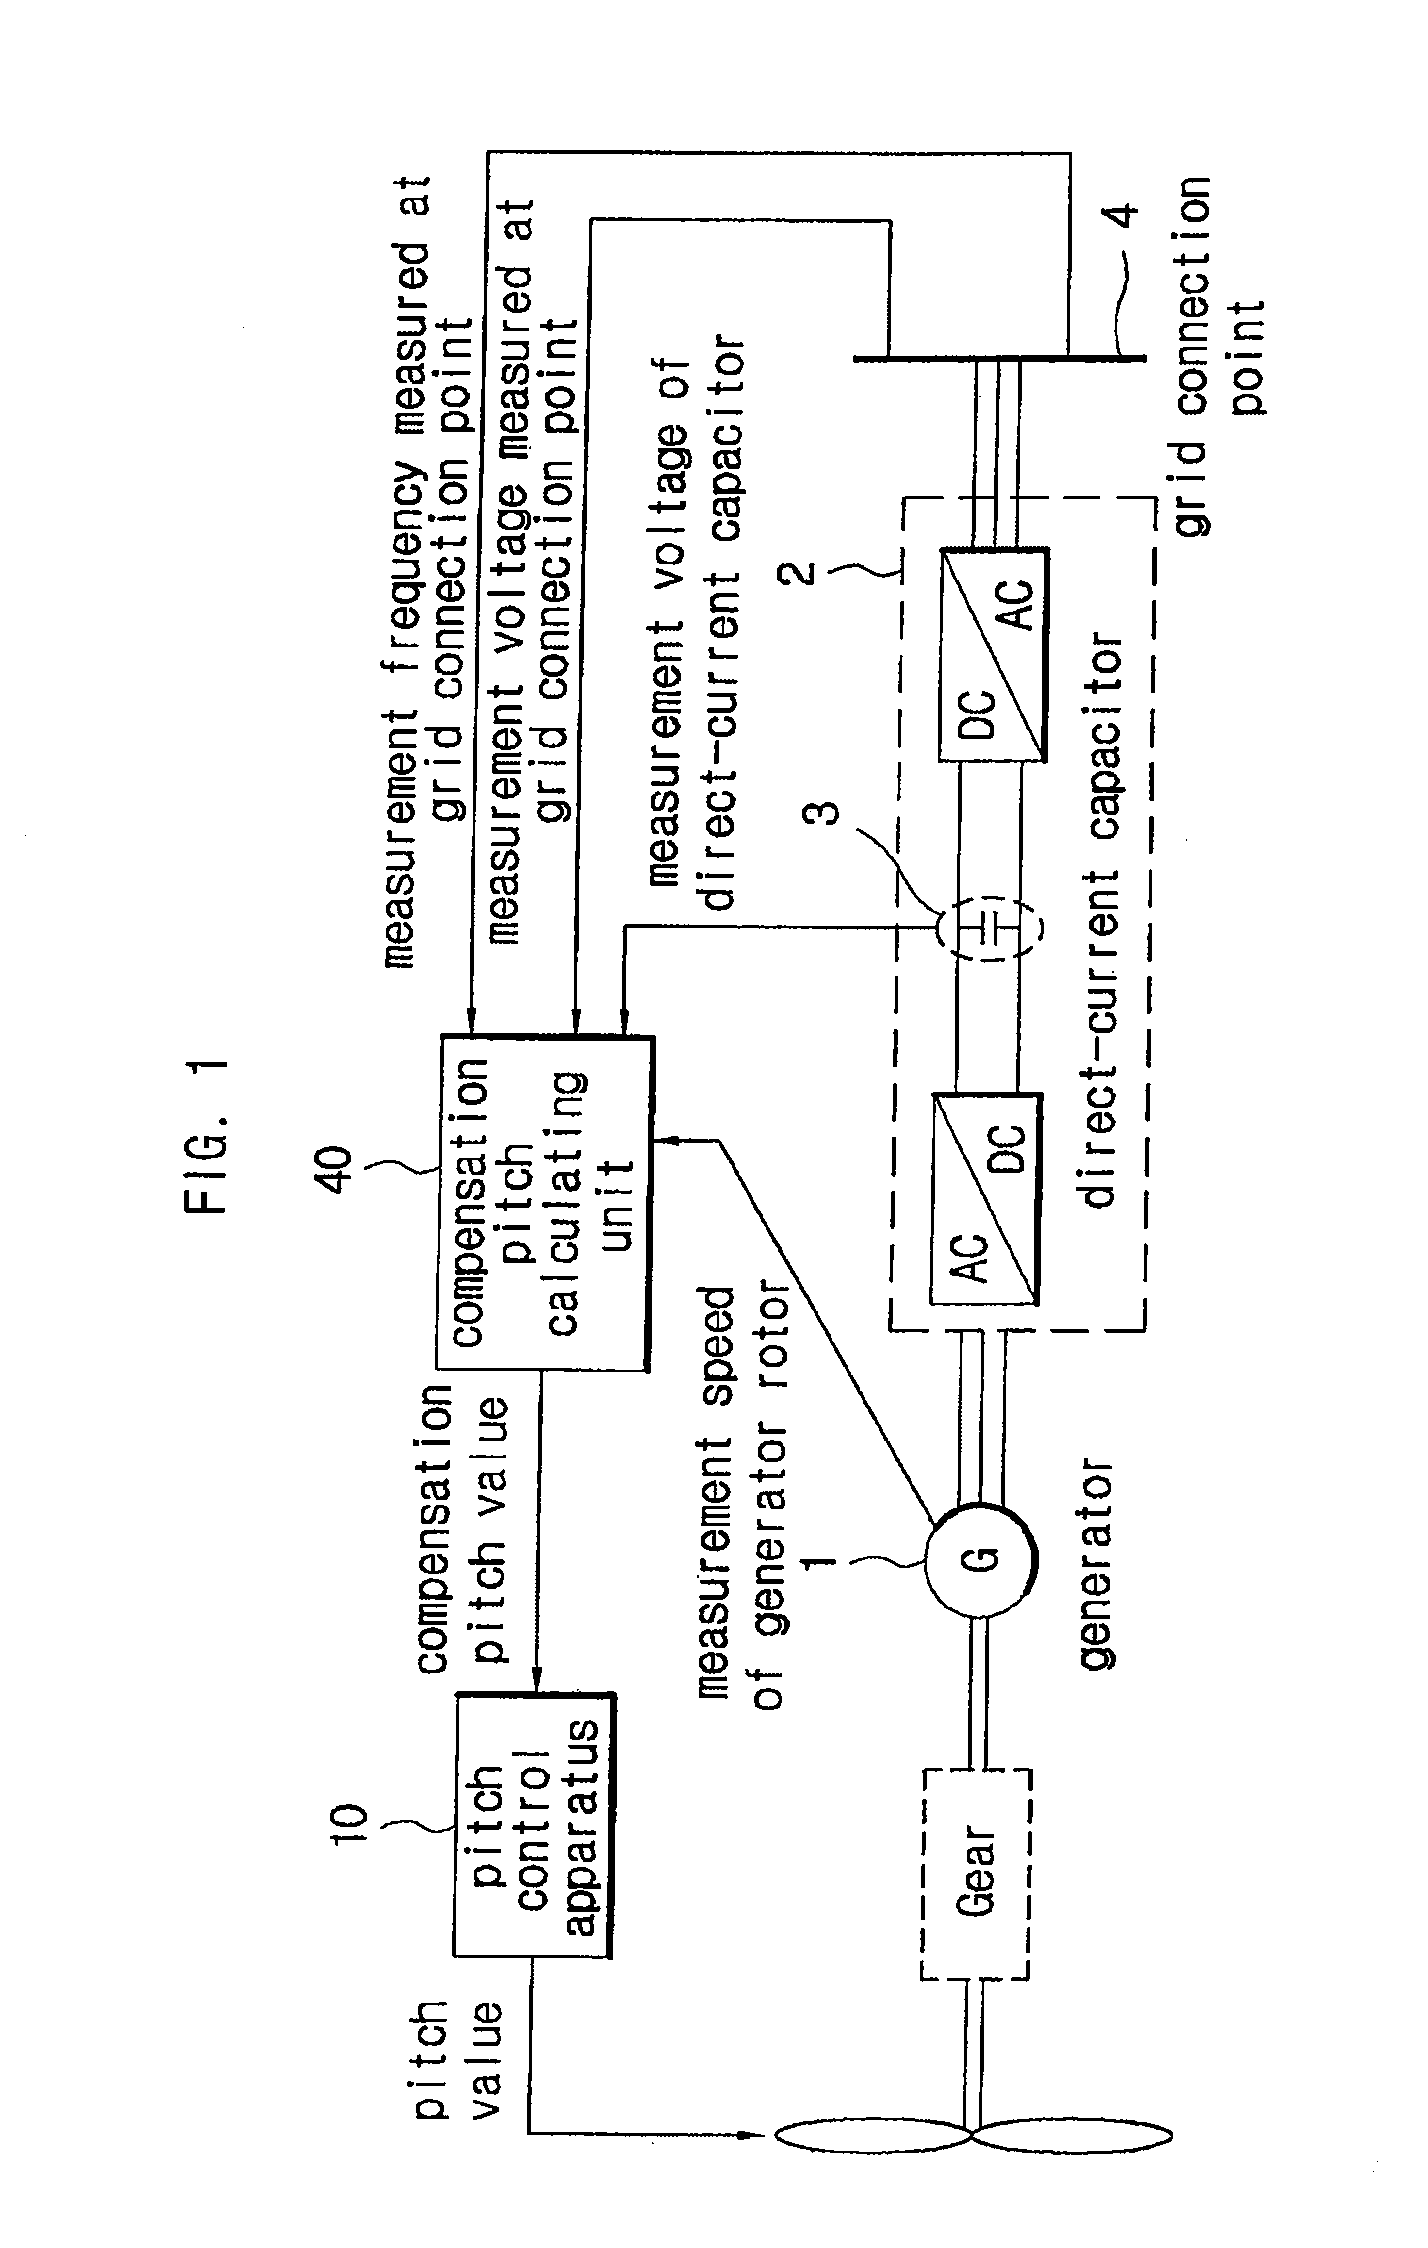 Apparatus and system for pitch angle control of wind turbine